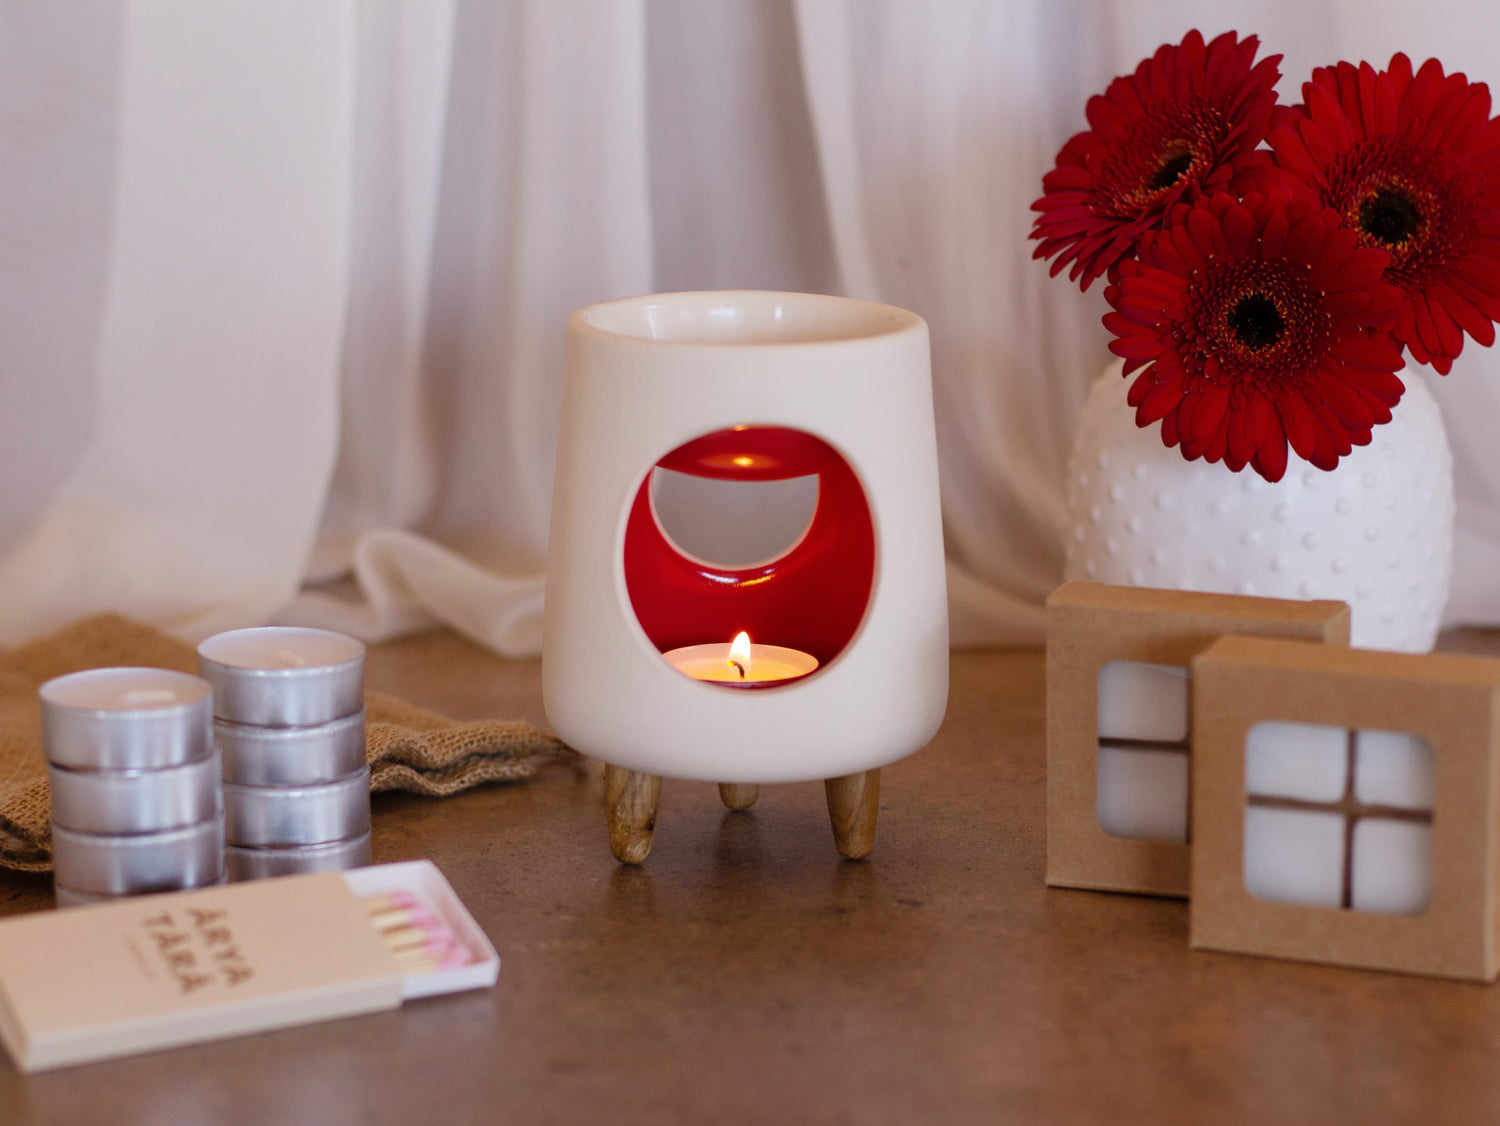 Ceramic wax warmer essential oil warmer by Arya Tara Candles. White outside red inside colored. Ceramic handmade tealight wax warmer with wooden legs.